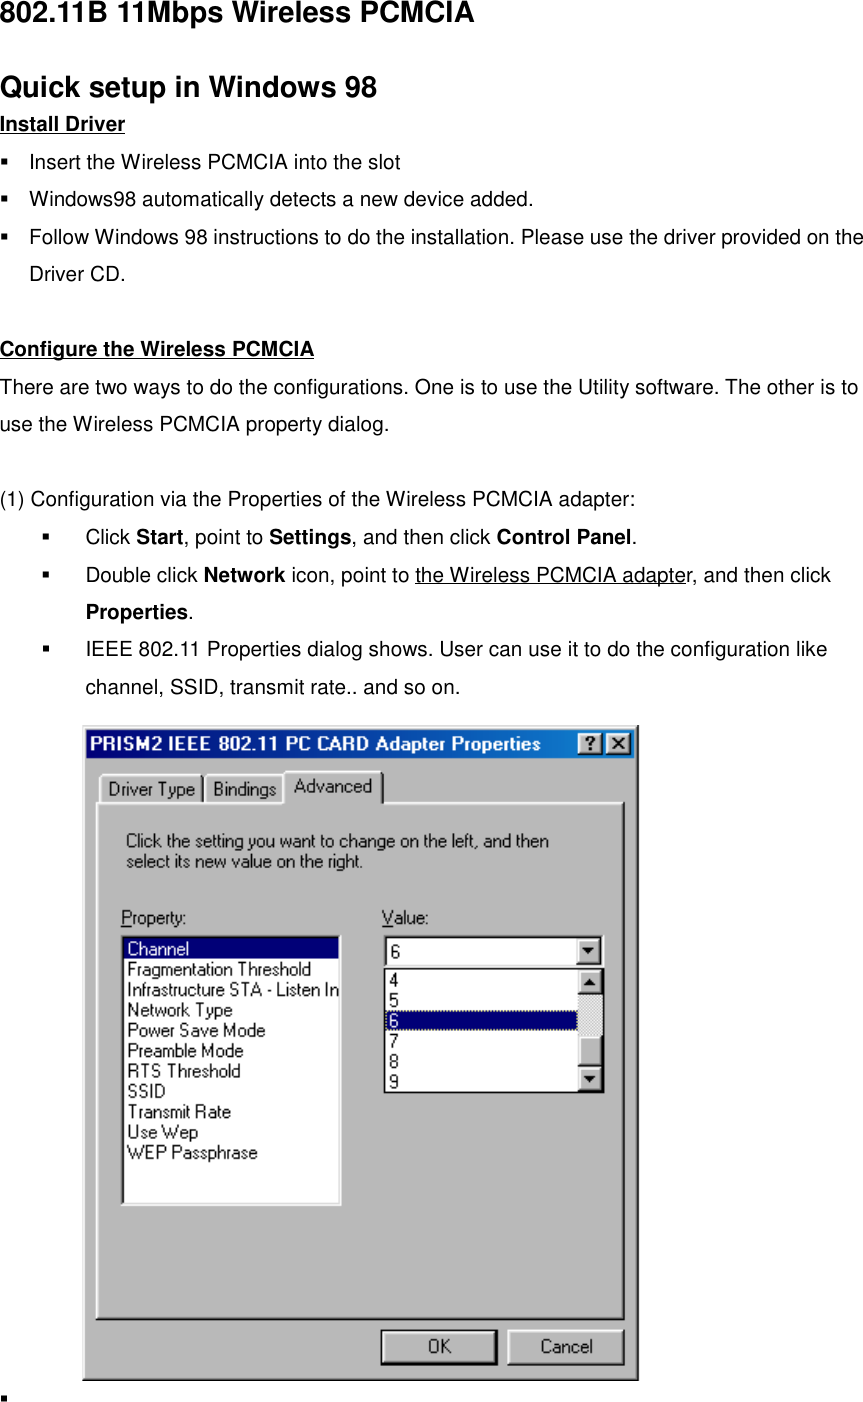 802.11B 11Mbps Wireless PCMCIAQuick setup in Windows 98Install Driver!  Insert the Wireless PCMCIA into the slot!  Windows98 automatically detects a new device added.!  Follow Windows 98 instructions to do the installation. Please use the driver provided on theDriver CD.Configure the Wireless PCMCIAThere are two ways to do the configurations. One is to use the Utility software. The other is touse the Wireless PCMCIA property dialog.(1) Configuration via the Properties of the Wireless PCMCIA adapter:! Click Start, point to Settings, and then click Control Panel.! Double click Network icon, point to the Wireless PCMCIA adapter, and then clickProperties.!  IEEE 802.11 Properties dialog shows. User can use it to do the configuration likechannel, SSID, transmit rate.. and so on.! 